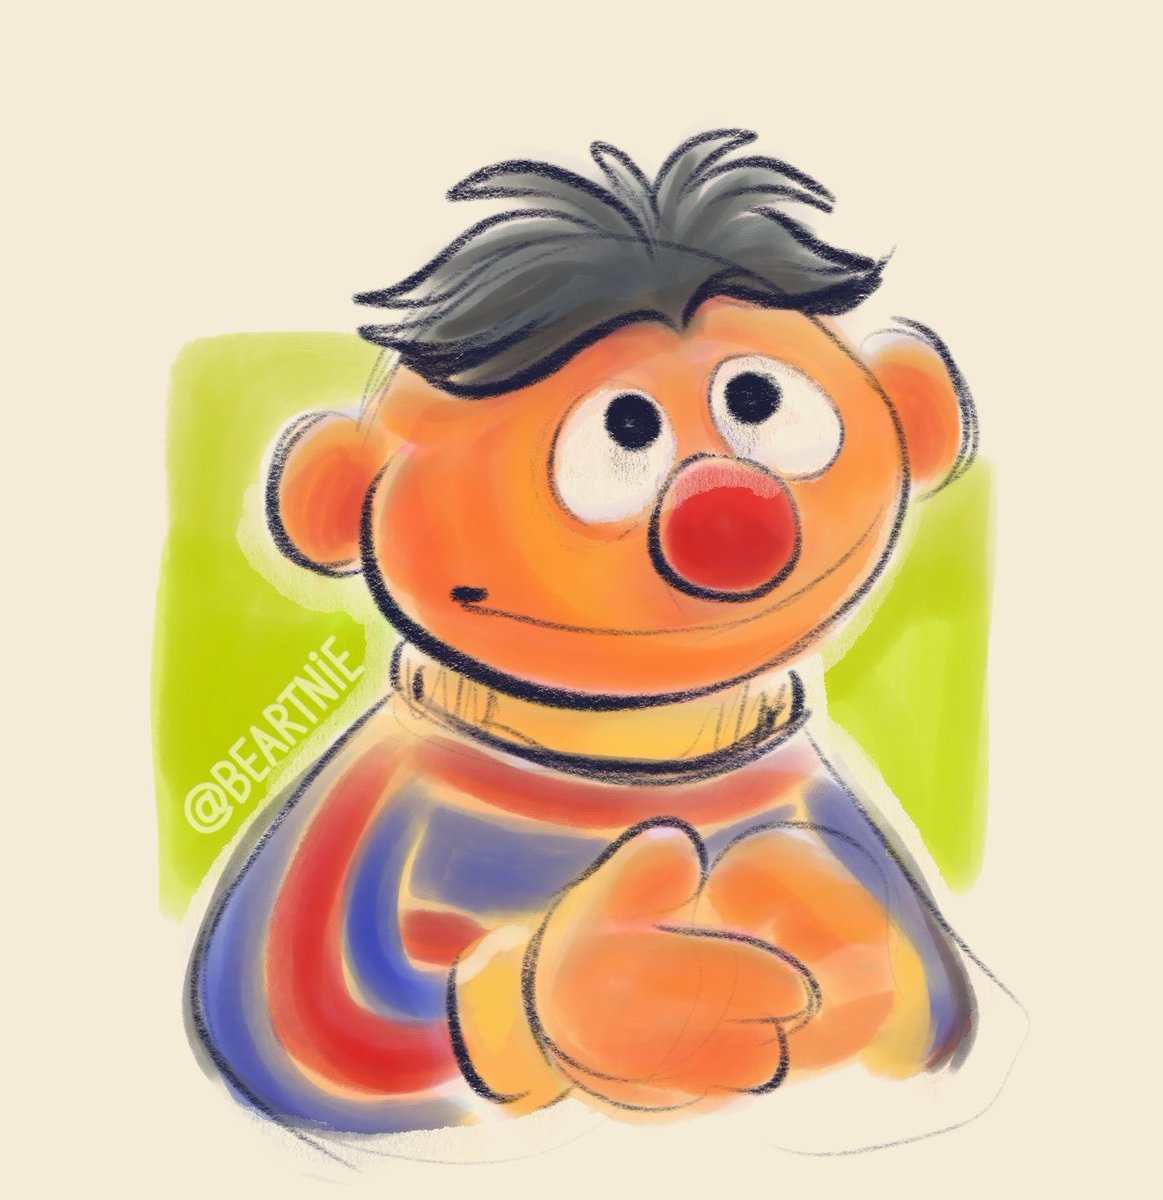 「Ernie,, 」|🧡💛 Share the Good News! 💛🧡のイラスト